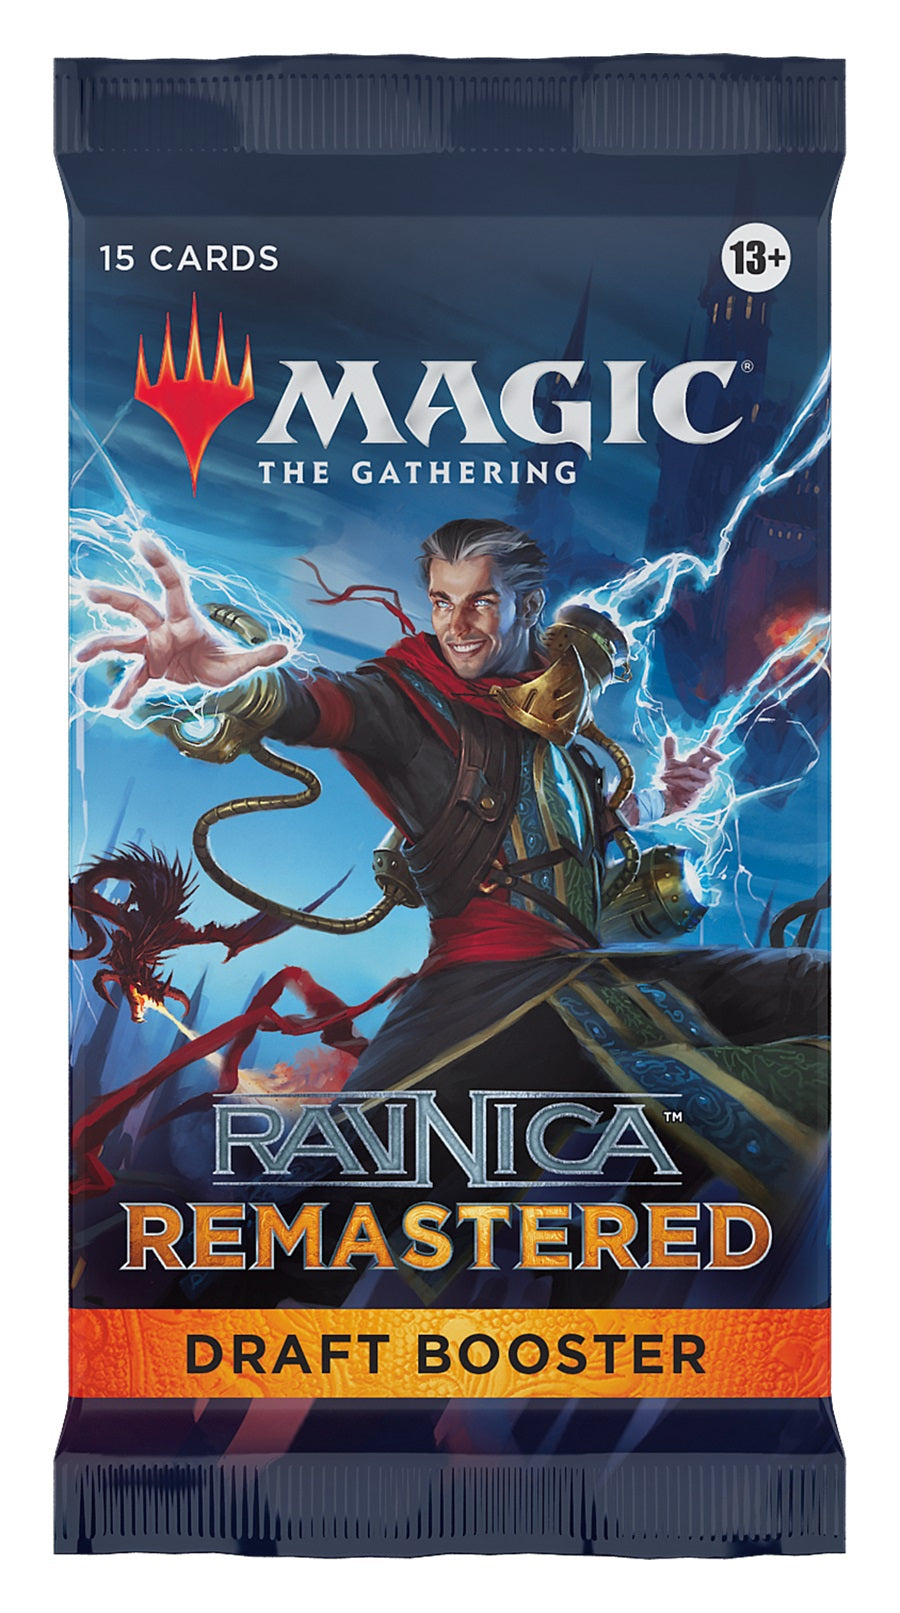 Magic: The Gathering - Ravnica Remastered (15-Card Draft Booster Pack)